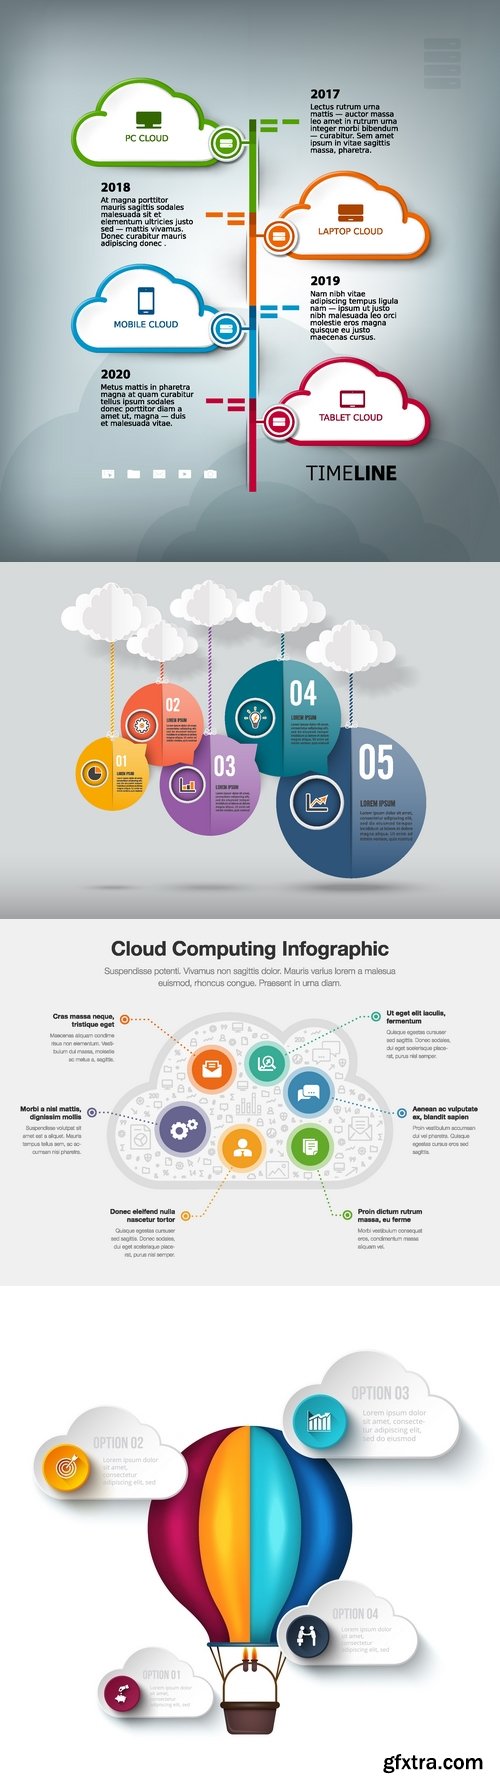 Vectors - Clouds Infographic Backgrounds 19